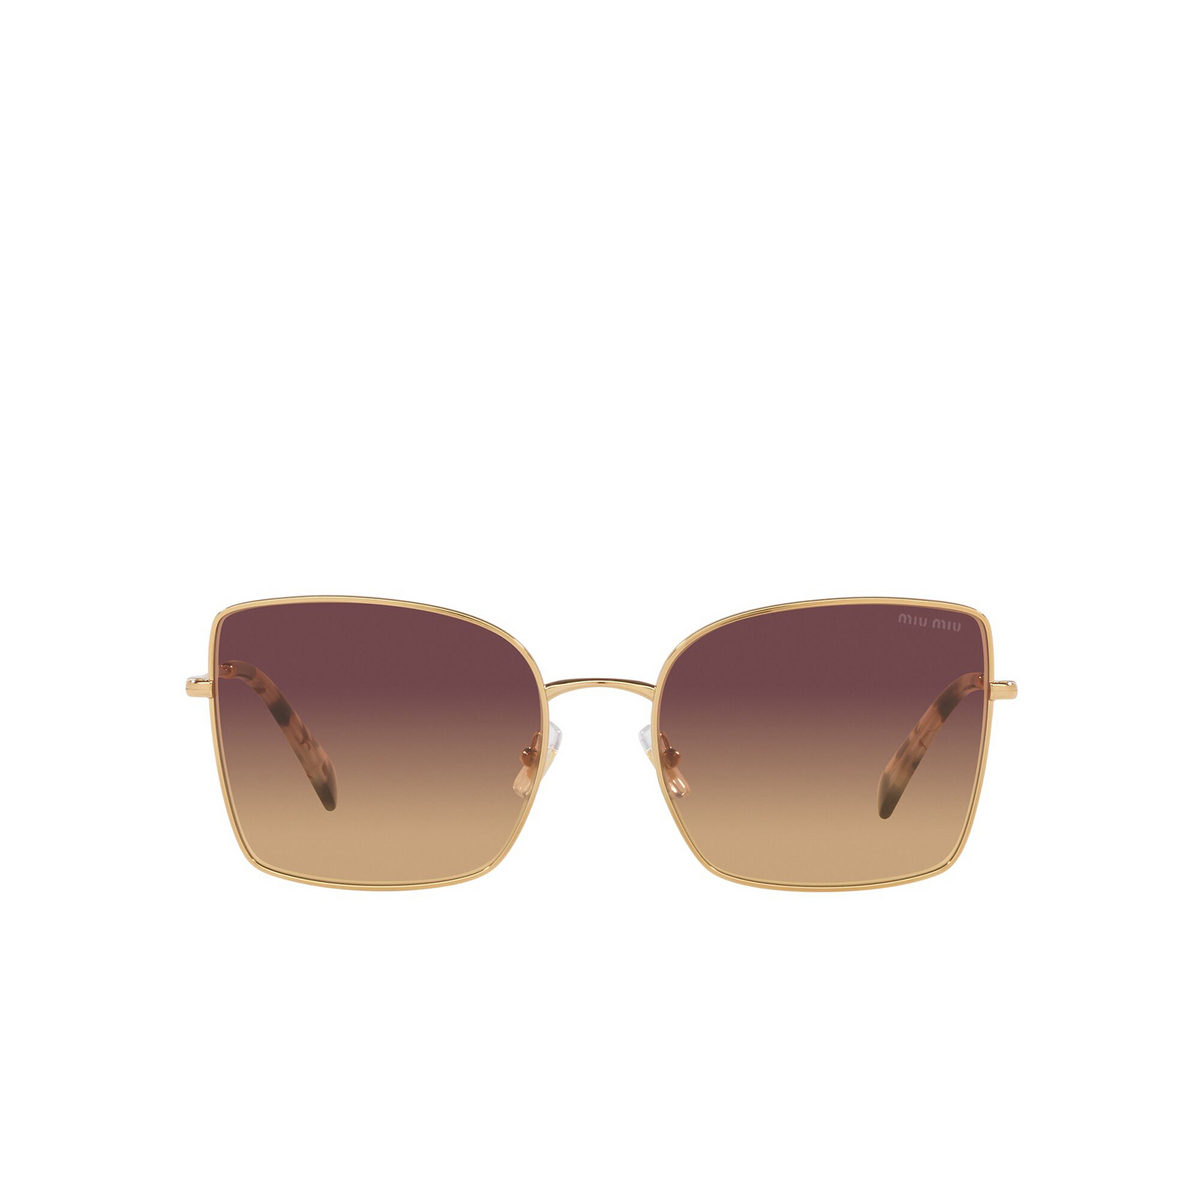 Miu Miu® Butterfly Sunglasses: MU 51WS color Antique Gold 7OE07P - front view.